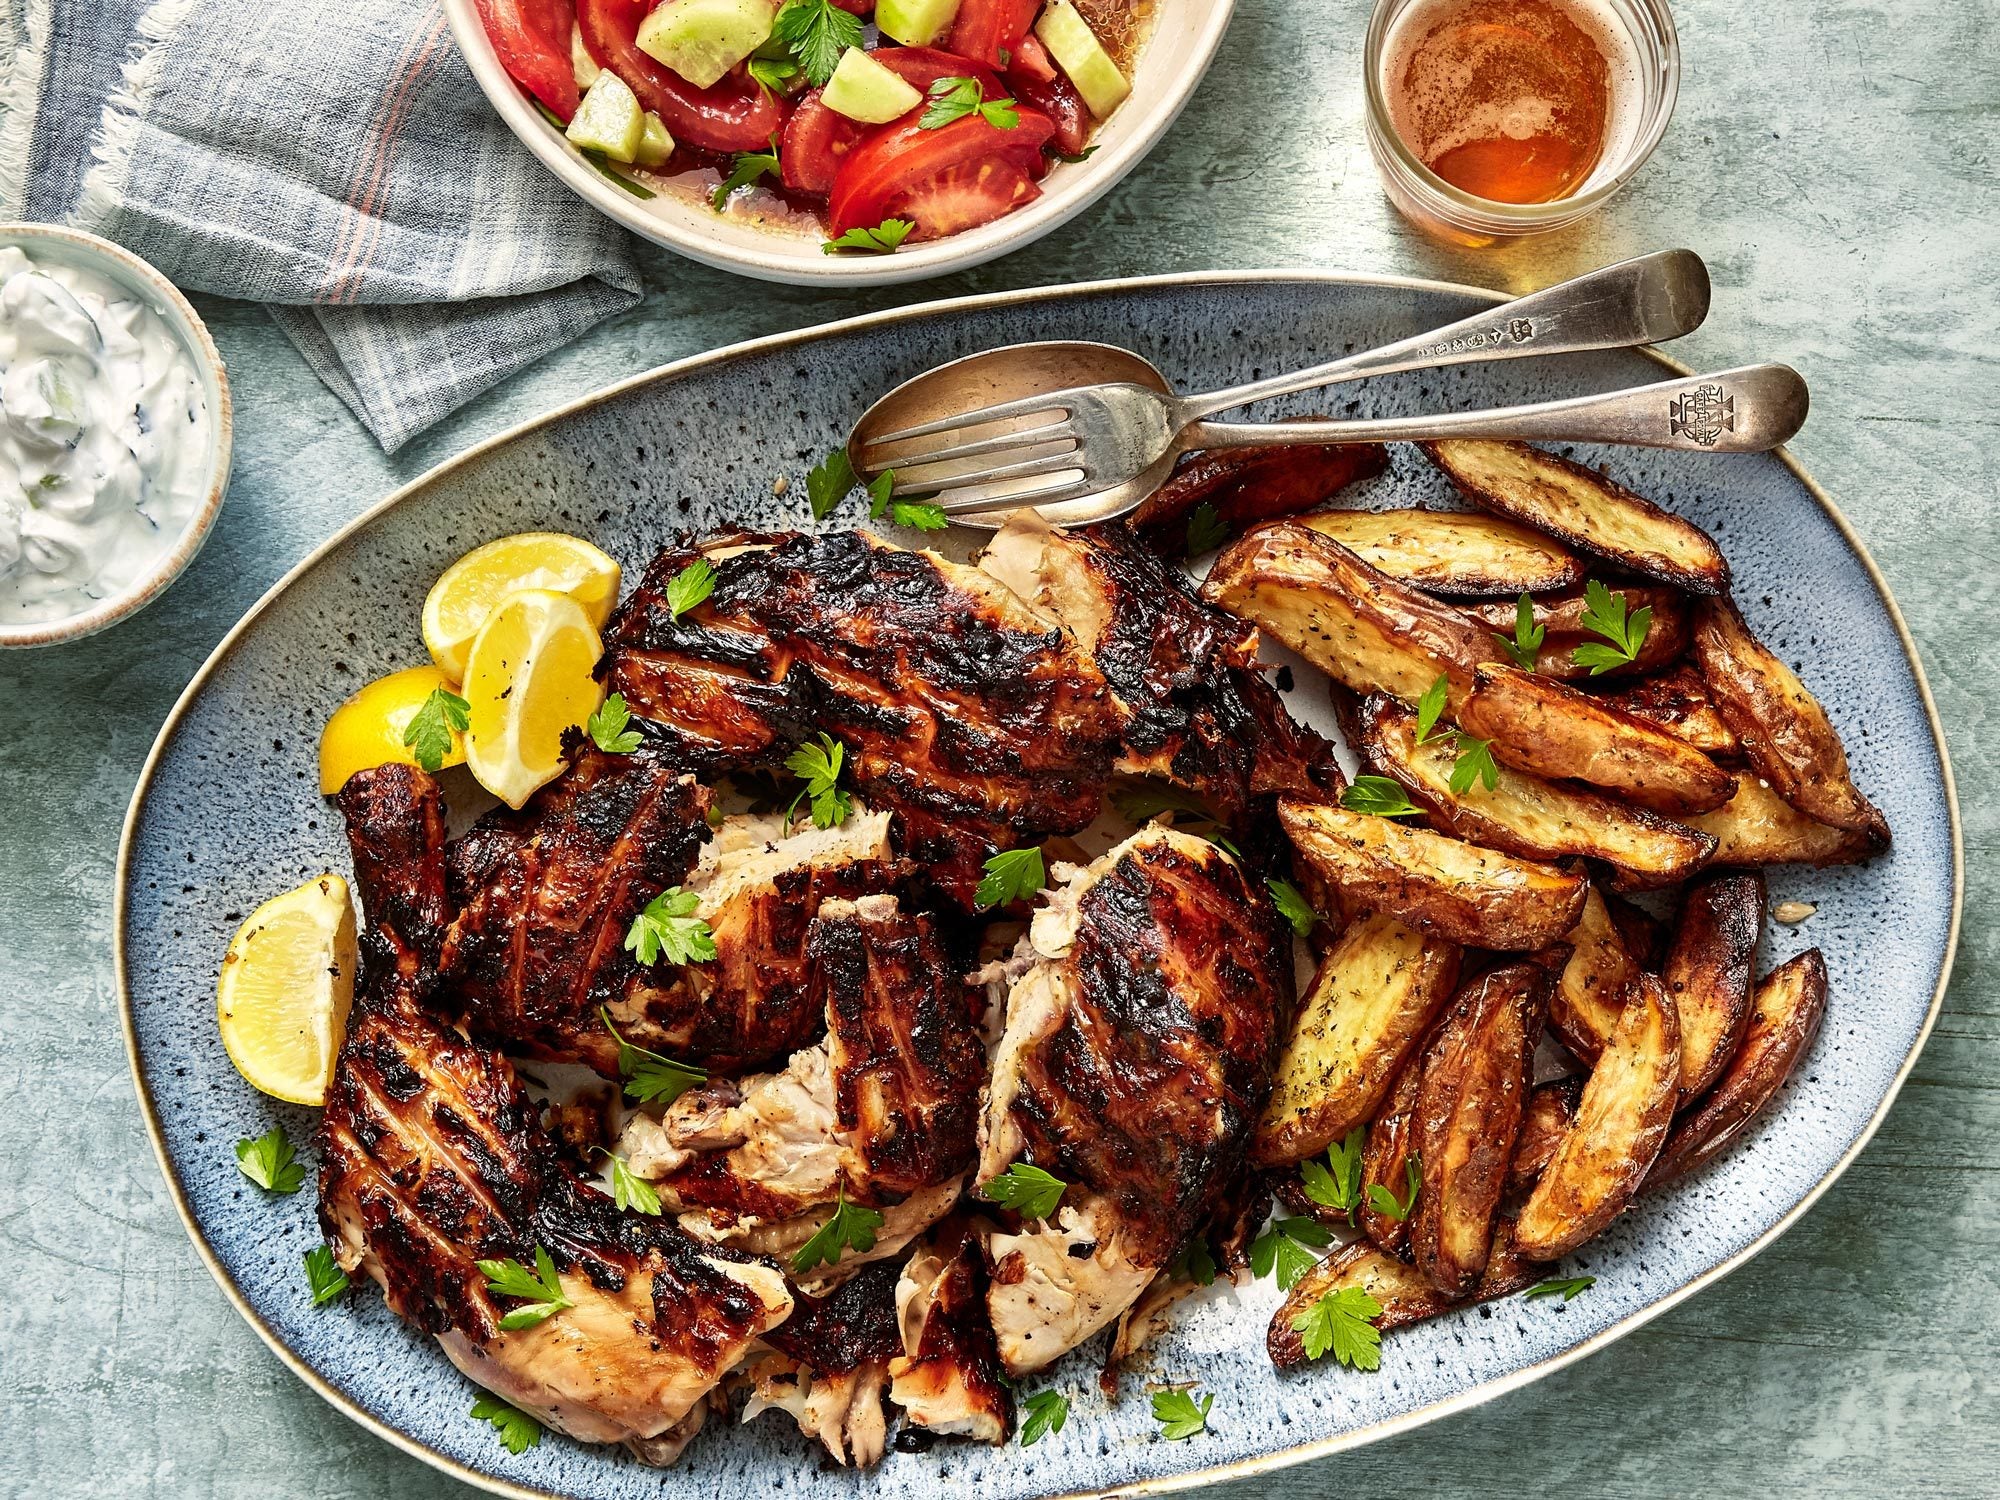 Article-Best-Summer-Grilling-Recipes-Marinated-Grilled-Chicken